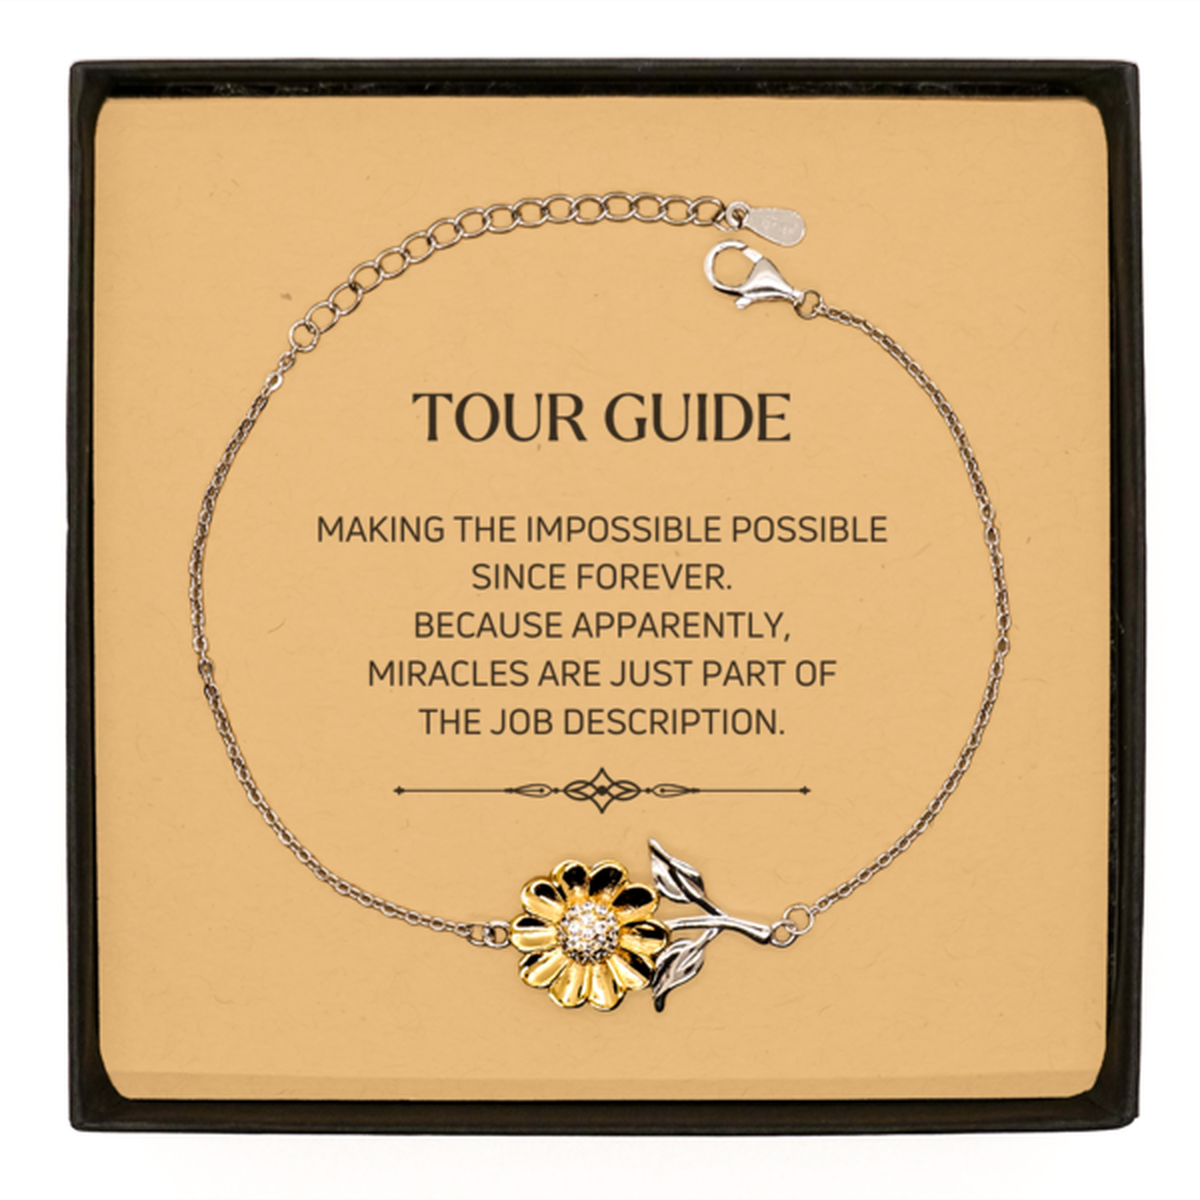 Funny Tour Guide Gifts, Miracles are just part of the job description, Inspirational Birthday Sunflower Bracelet For Tour Guide, Men, Women, Coworkers, Friends, Boss